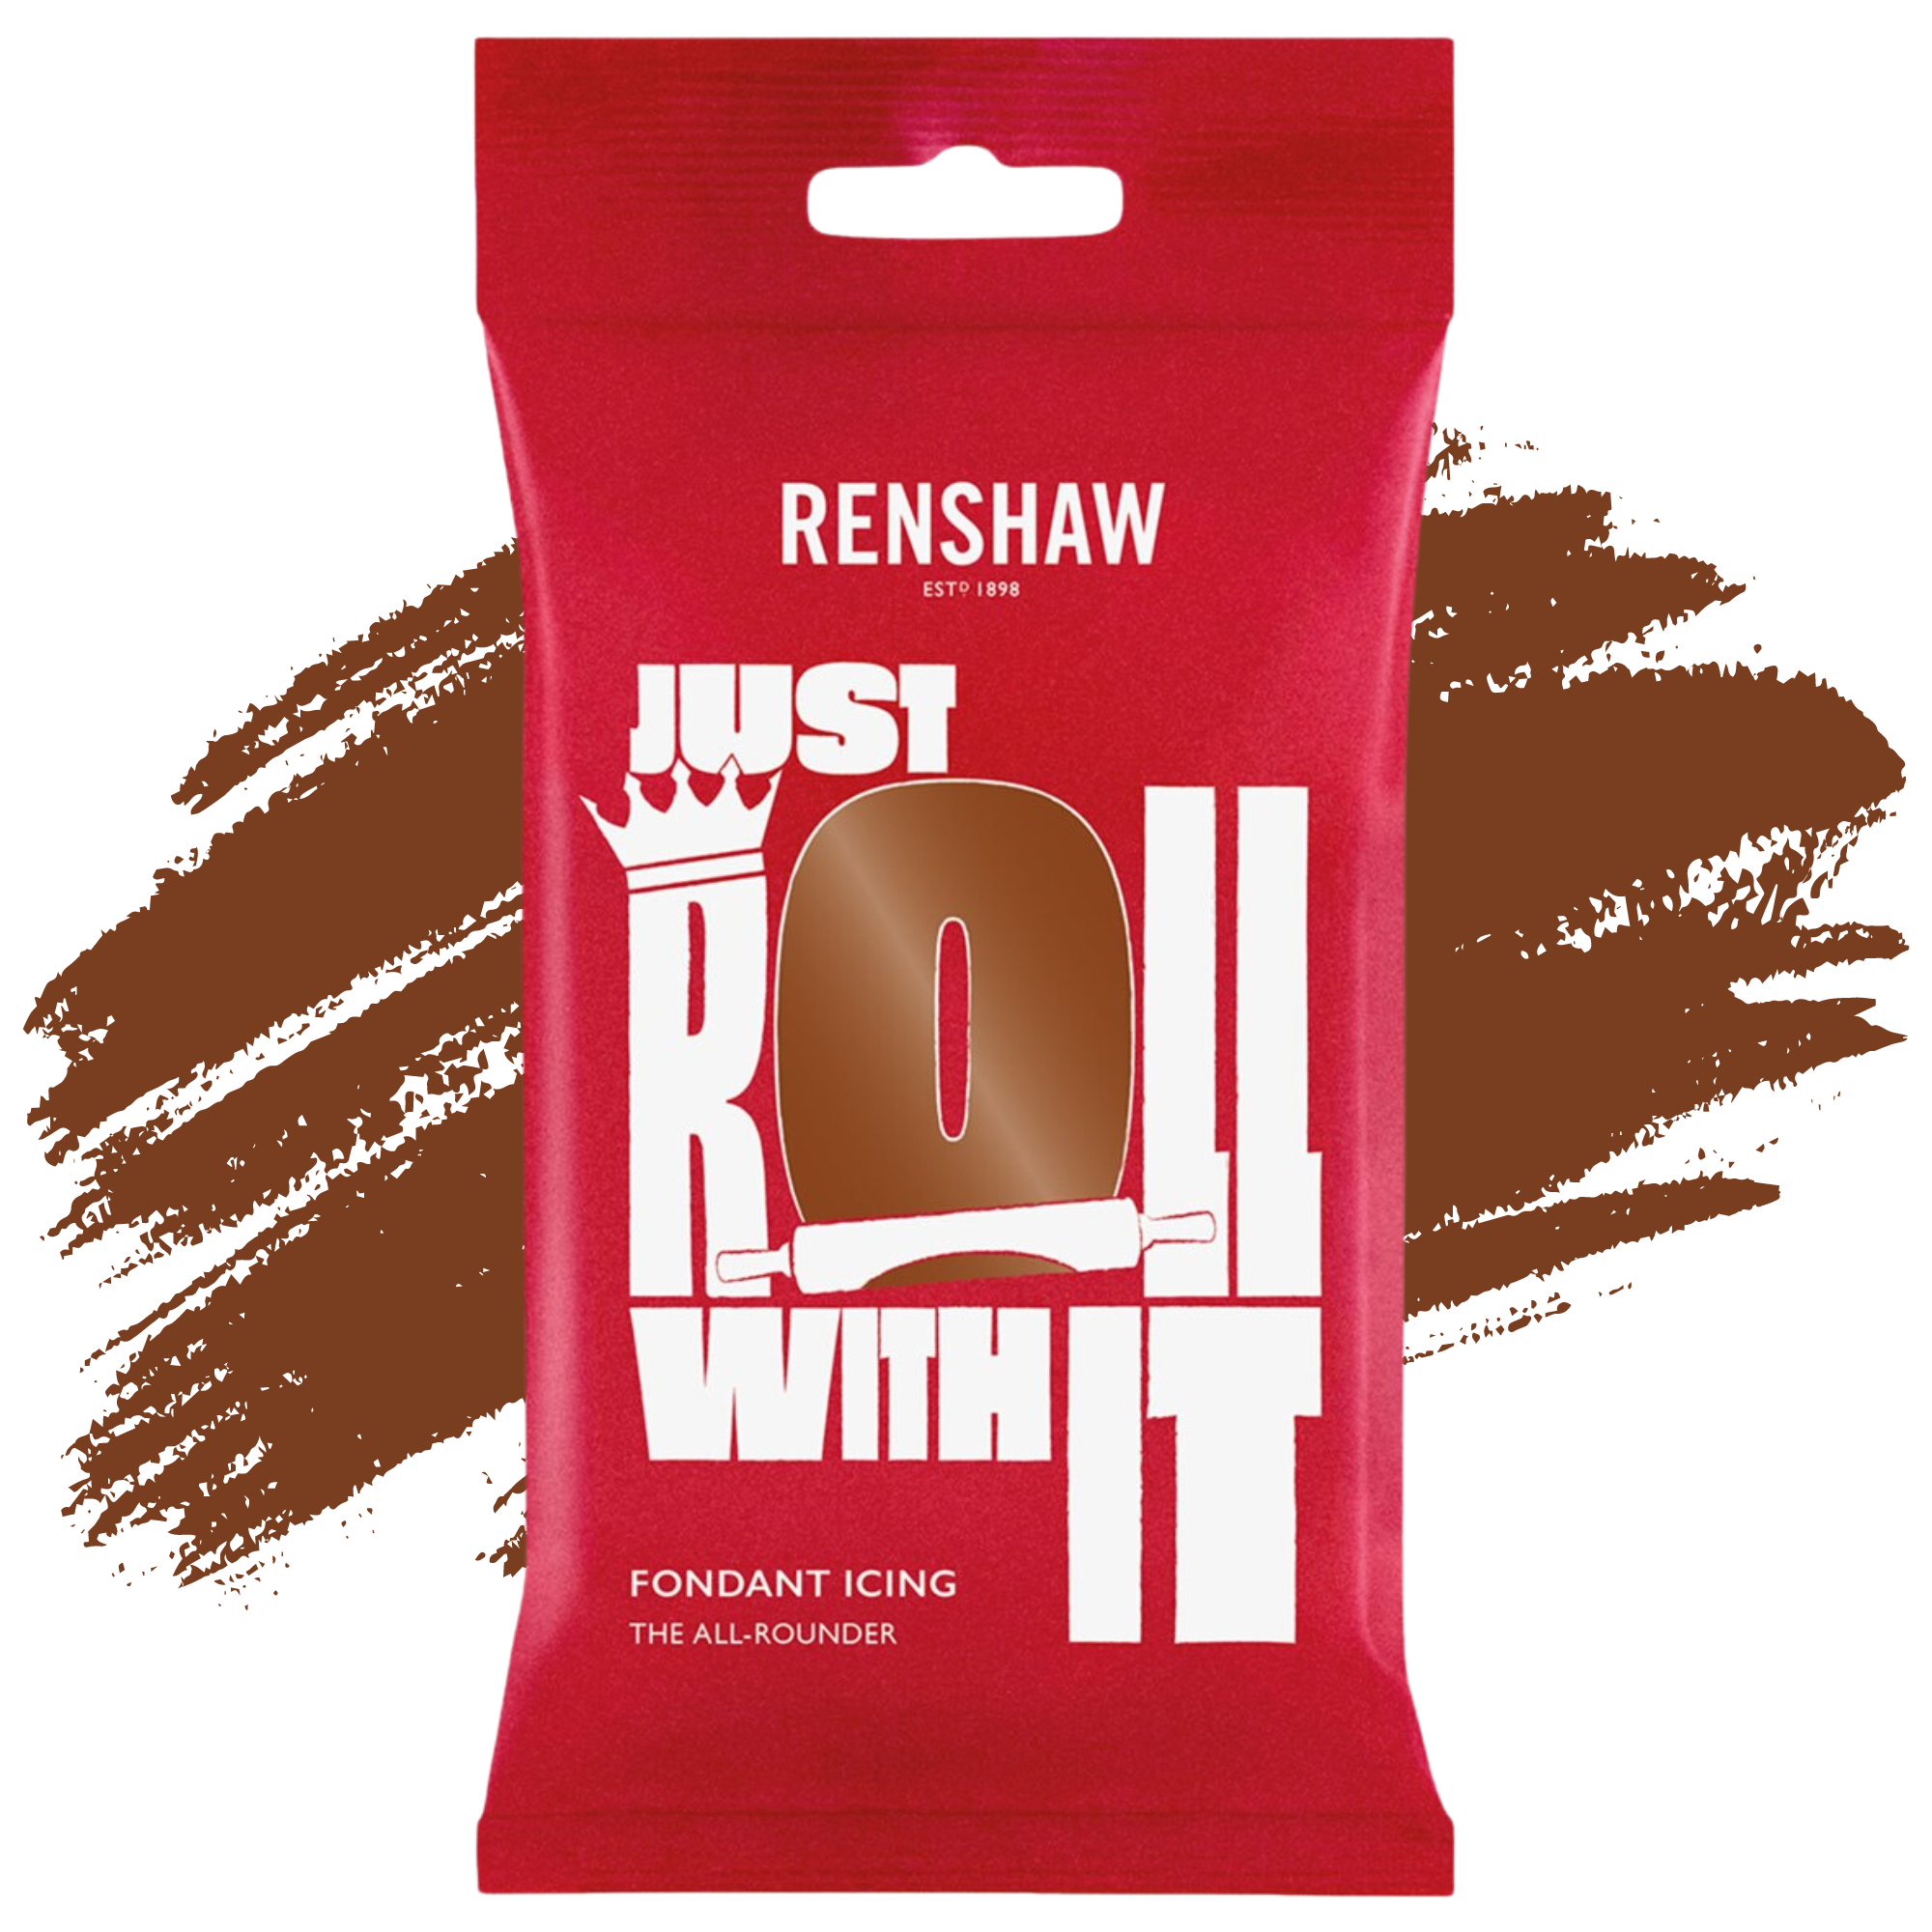 Renshaw Professional Sugar Paste Ready to Roll Fondant Just Roll with it Icing - Dark Brown - 250g